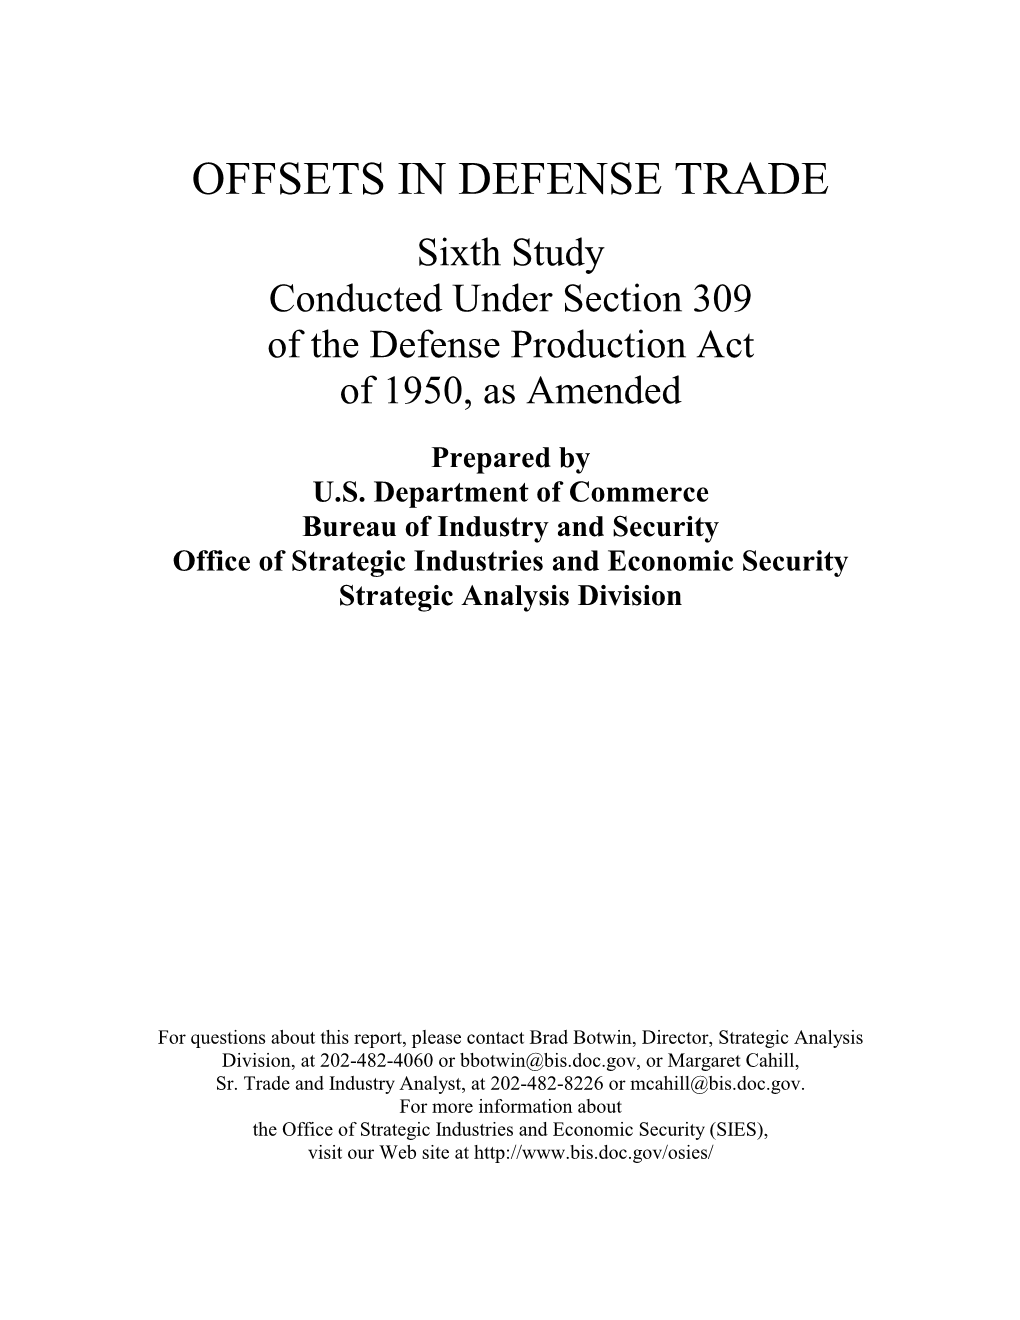 Offsets in Defense Trade